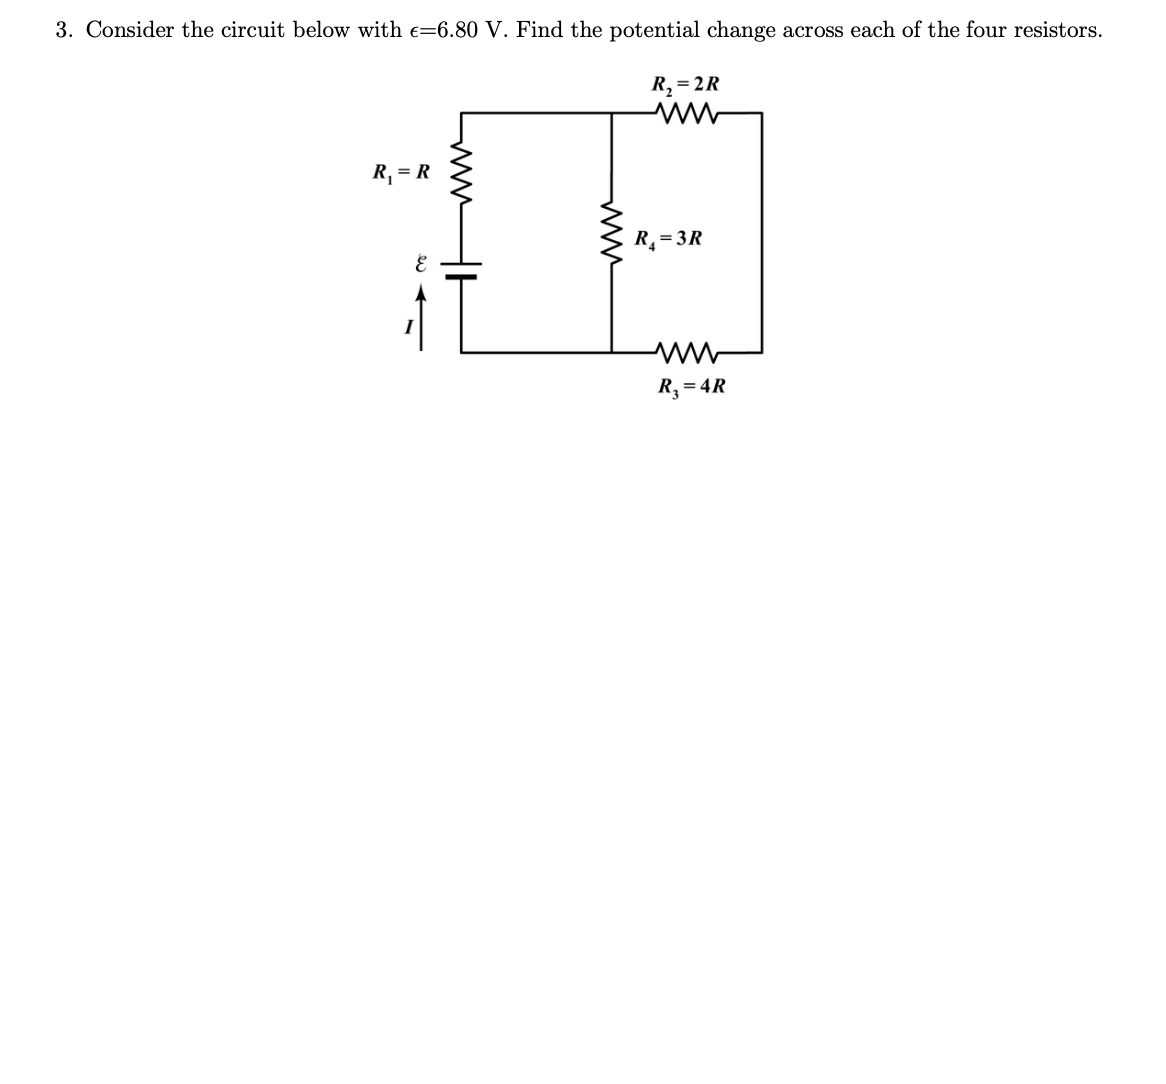 3. Consider the circuit below with e=6.80 V. Find the potential change across each of the four resistors.
R, = 2R
R, = R
R = 3R
R = 4R
